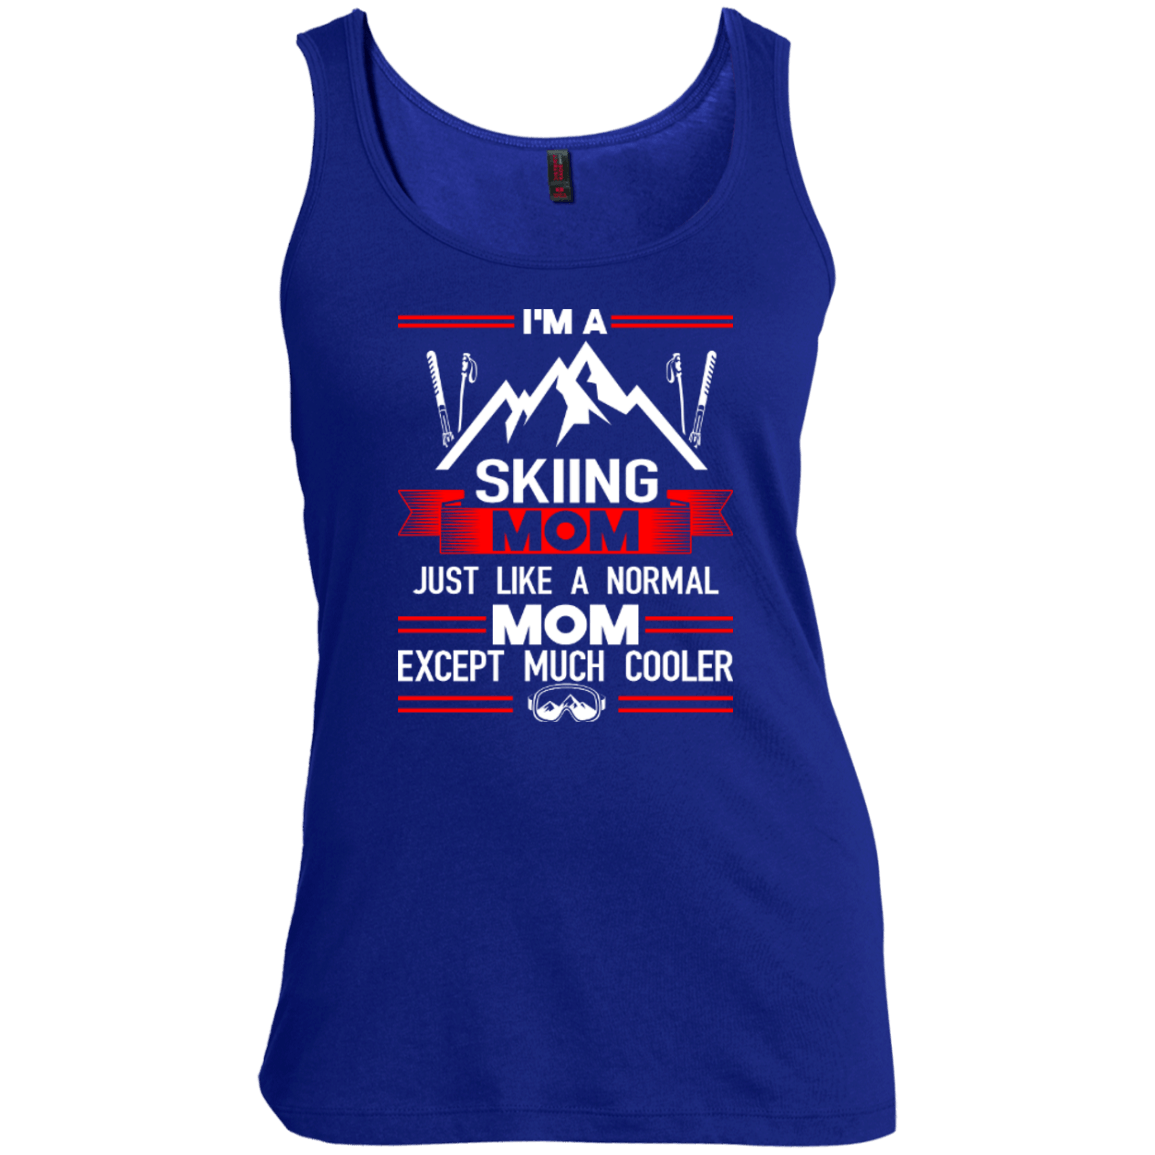 I'm A Skiing Mom Just Like A Normal Mom Except Much Cooler Tank Tops - Powderaddicts